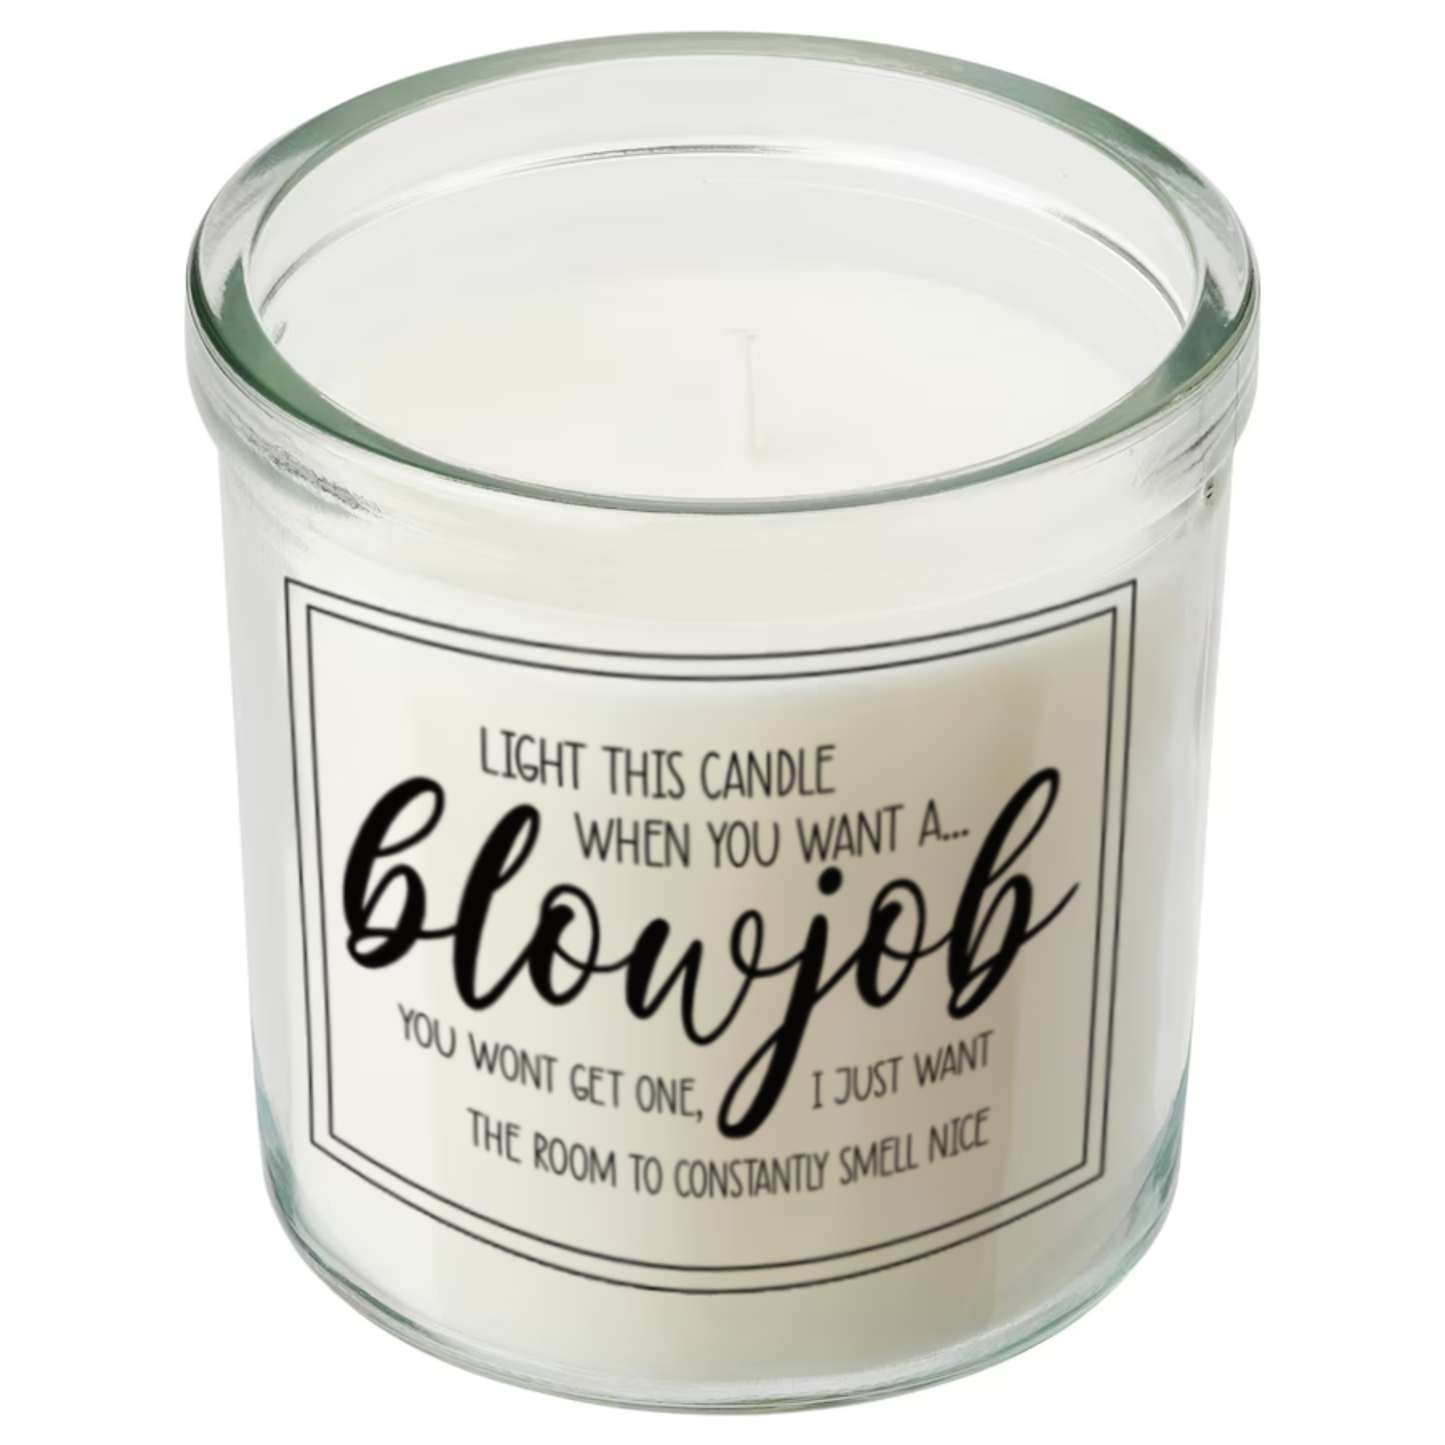 Glass jar candle with white wax. Clear label to the front features a funny quote which reads 'light this candle when you want a blowjob. You won't get one, i just want the room to constantly smell nice'. 